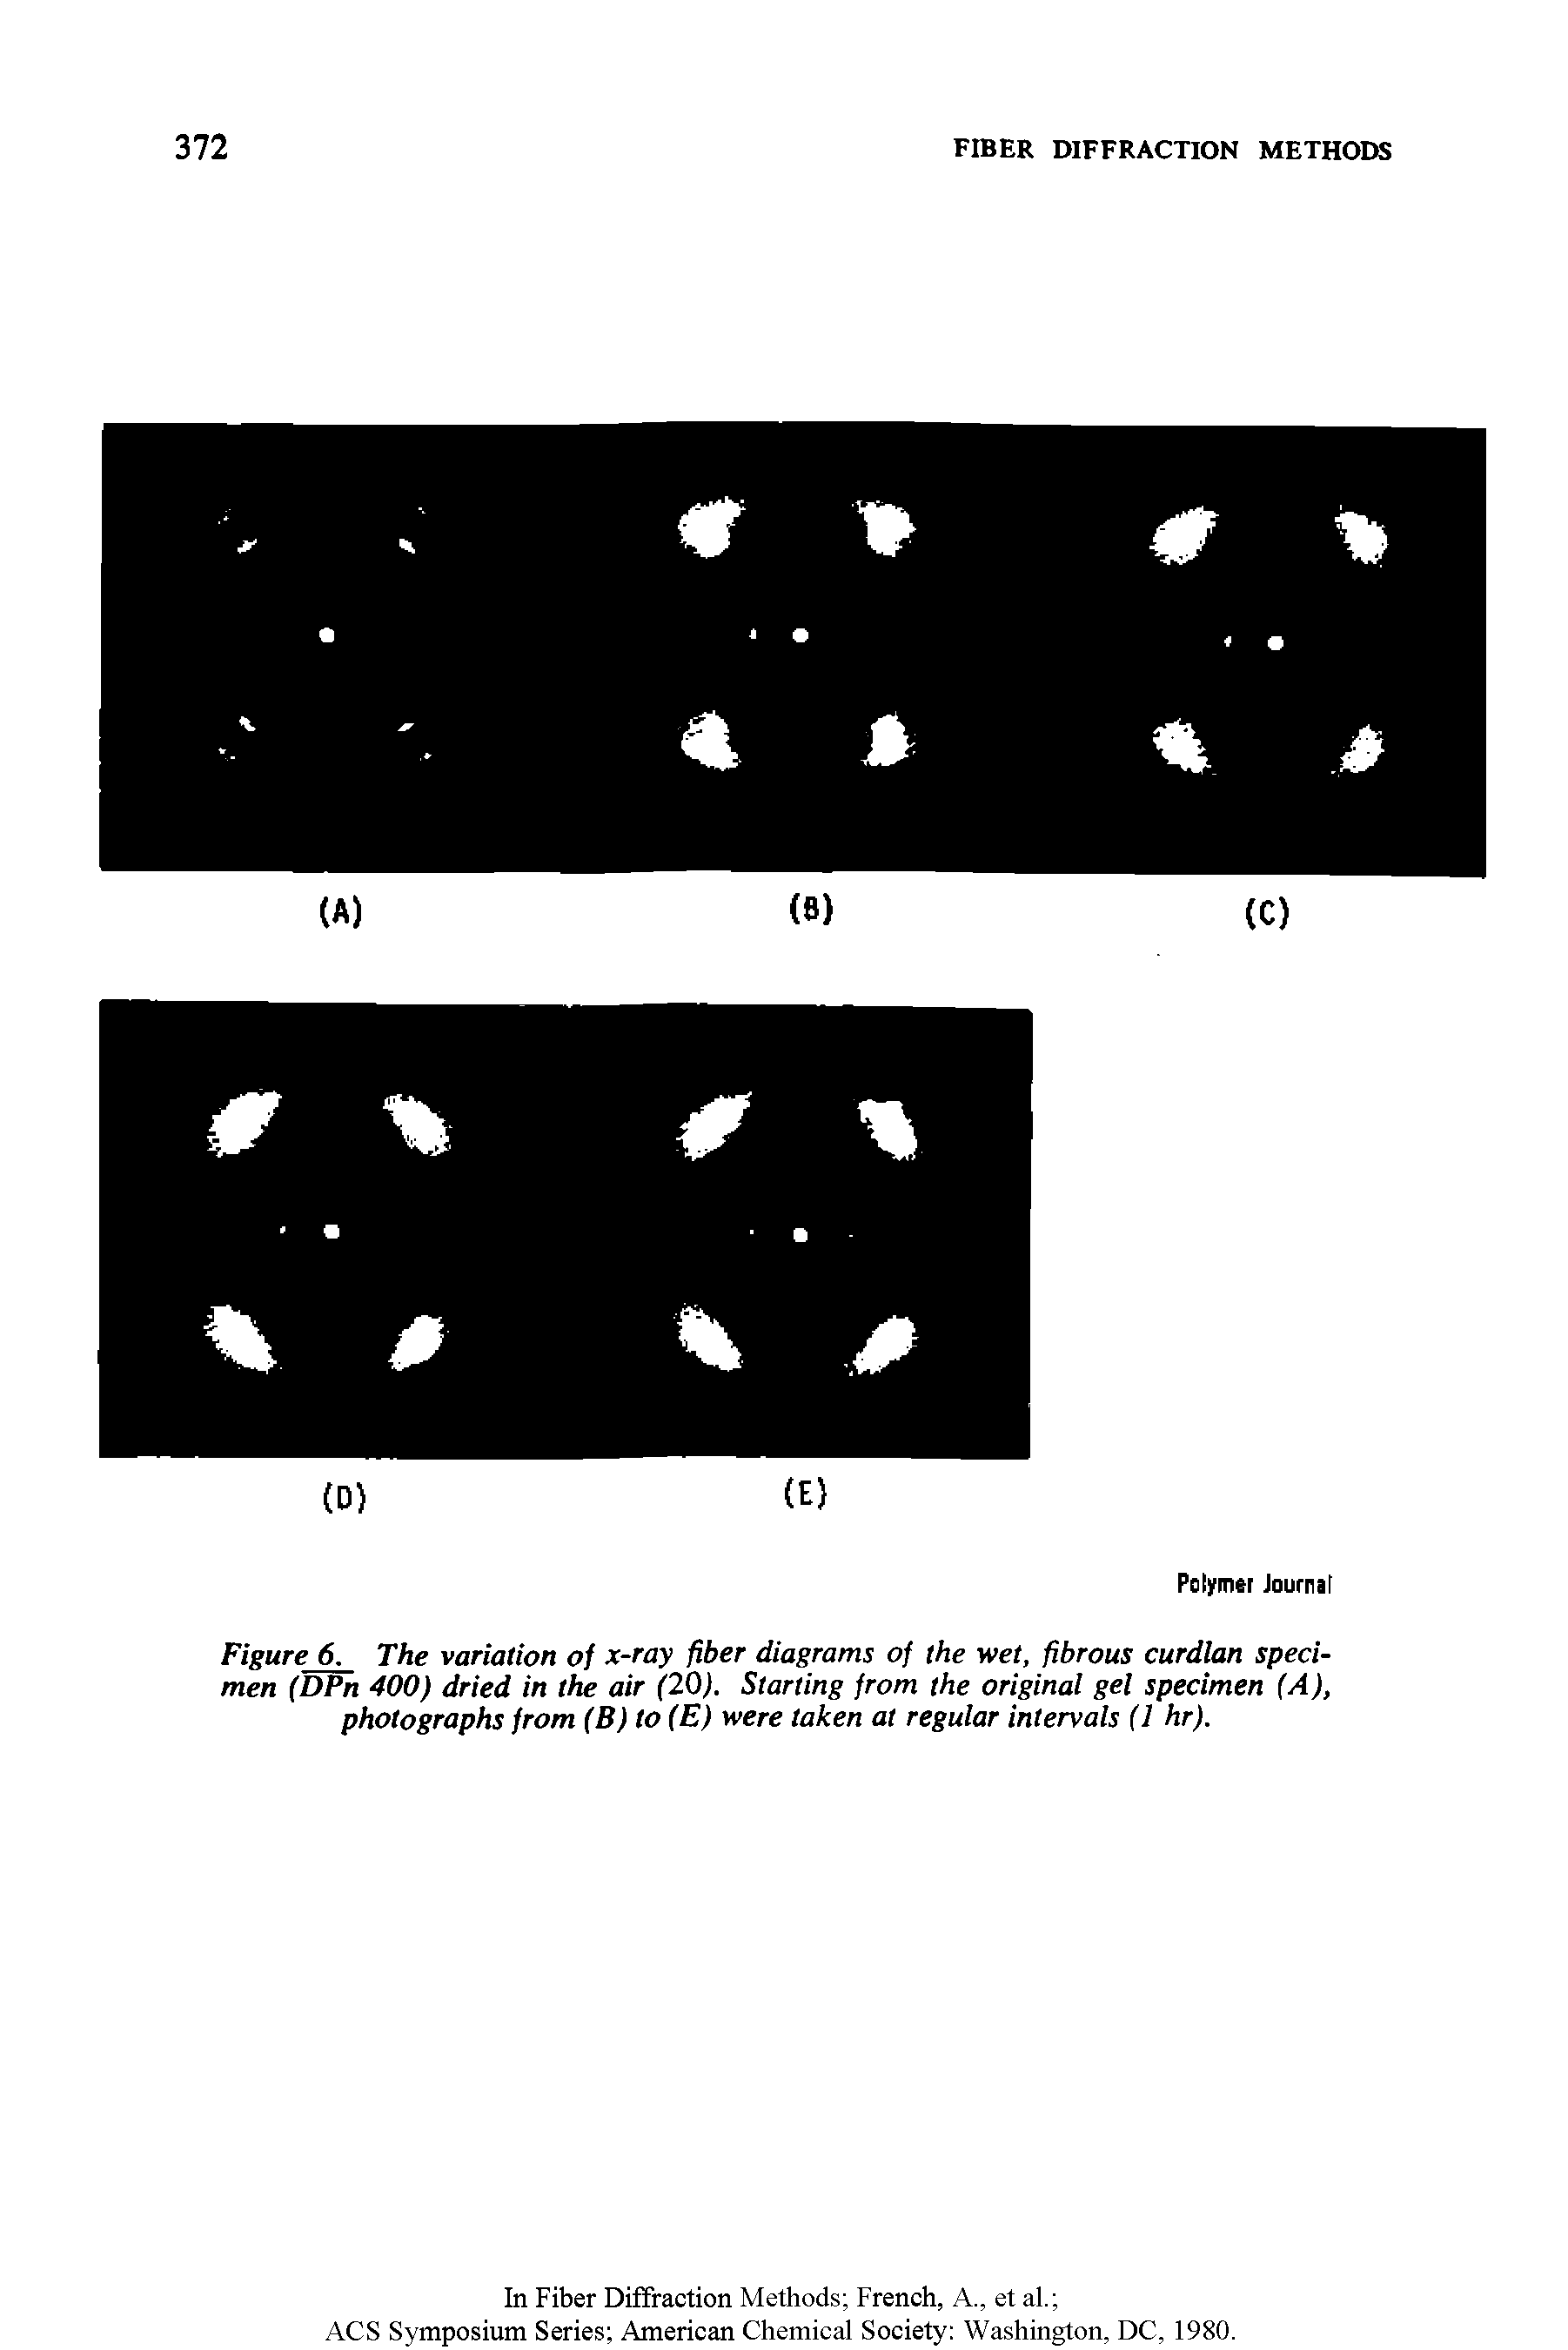 Figure 6. The variation of x-ray fiber diagrams of the wet, fibrous curdlan specimen (DPn 400) dried in the air (20). Starting from the original gel specimen (A), photographs from (B) to (E) were taken at regular intervals (1 hr).